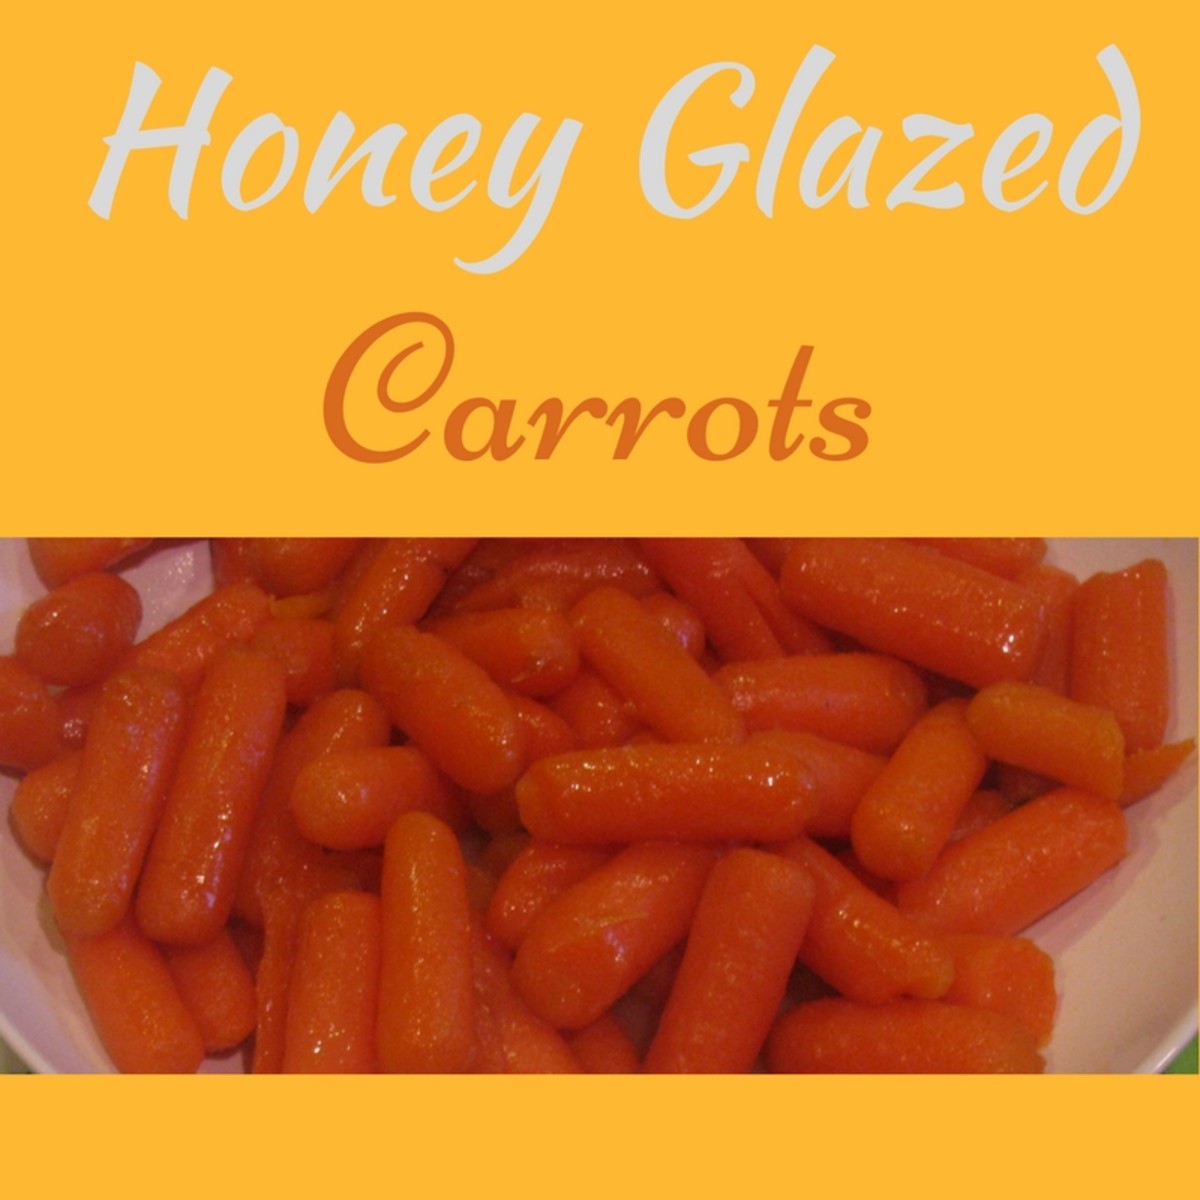 Try these sweet carrots as a side dish, or just eat them as a snack.